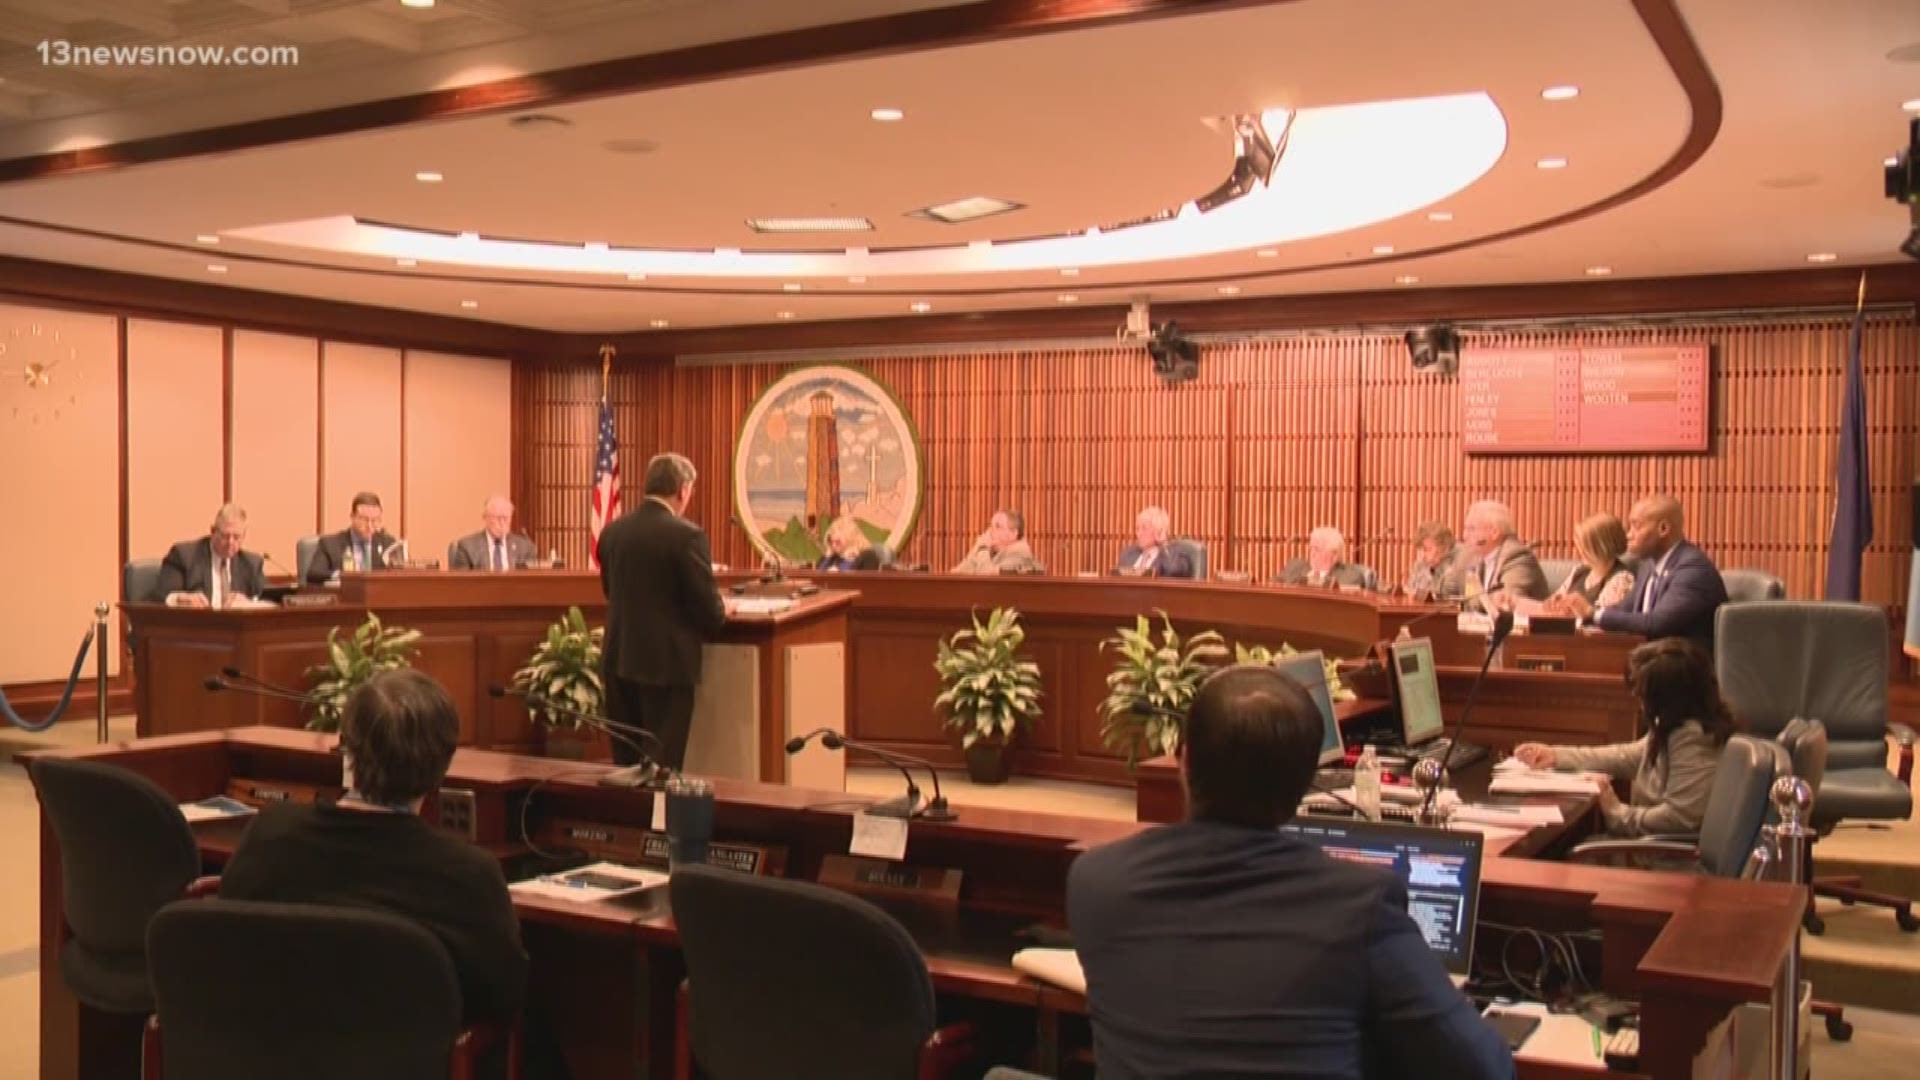 13News Now Ali Weatherton breaks down the budget and plan Acting City Manager Tom Leahy put forward for Virginia Beach, which cites the mass shooting investigation.